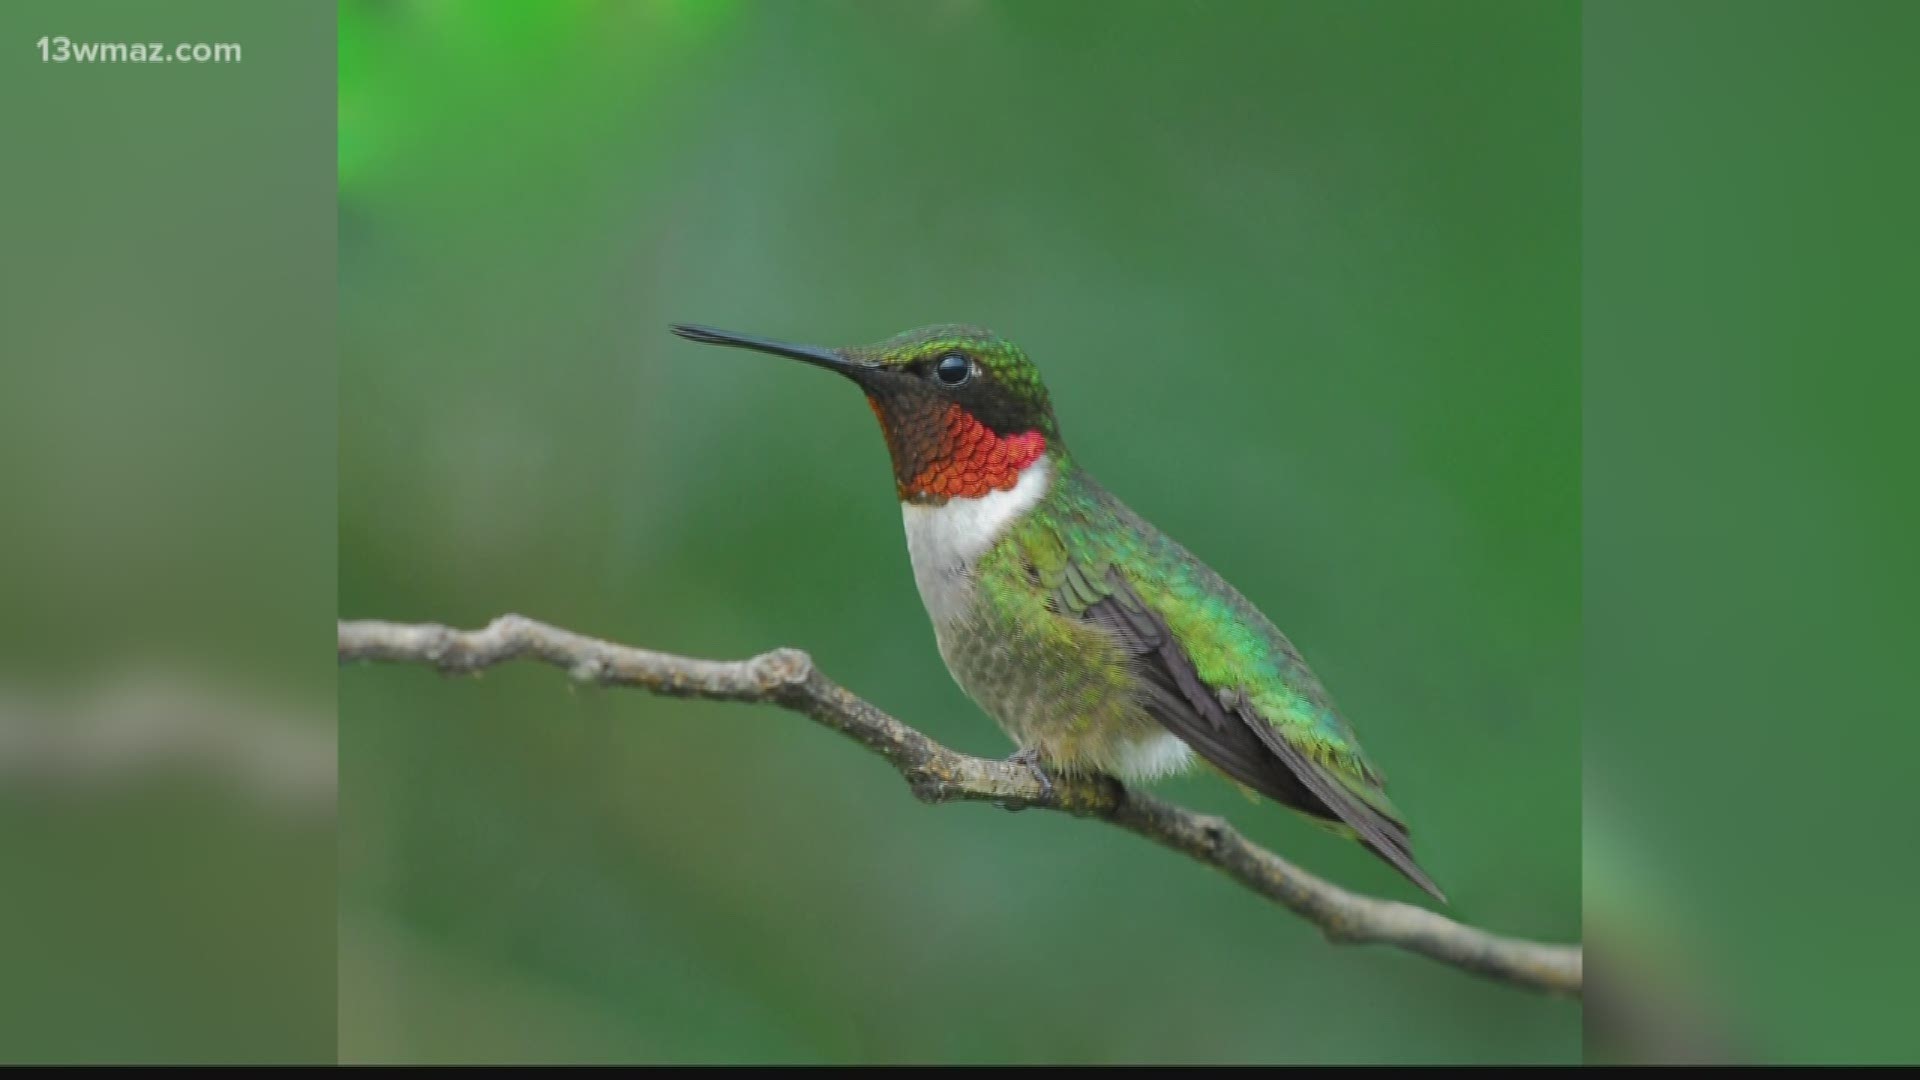 Summertime means the birds are singing from morning until night, but one bird hasn’t been seen much this year. Several viewers reached out to 13WMAZ asking us to VERIFY if the hummingbird population has dropped.